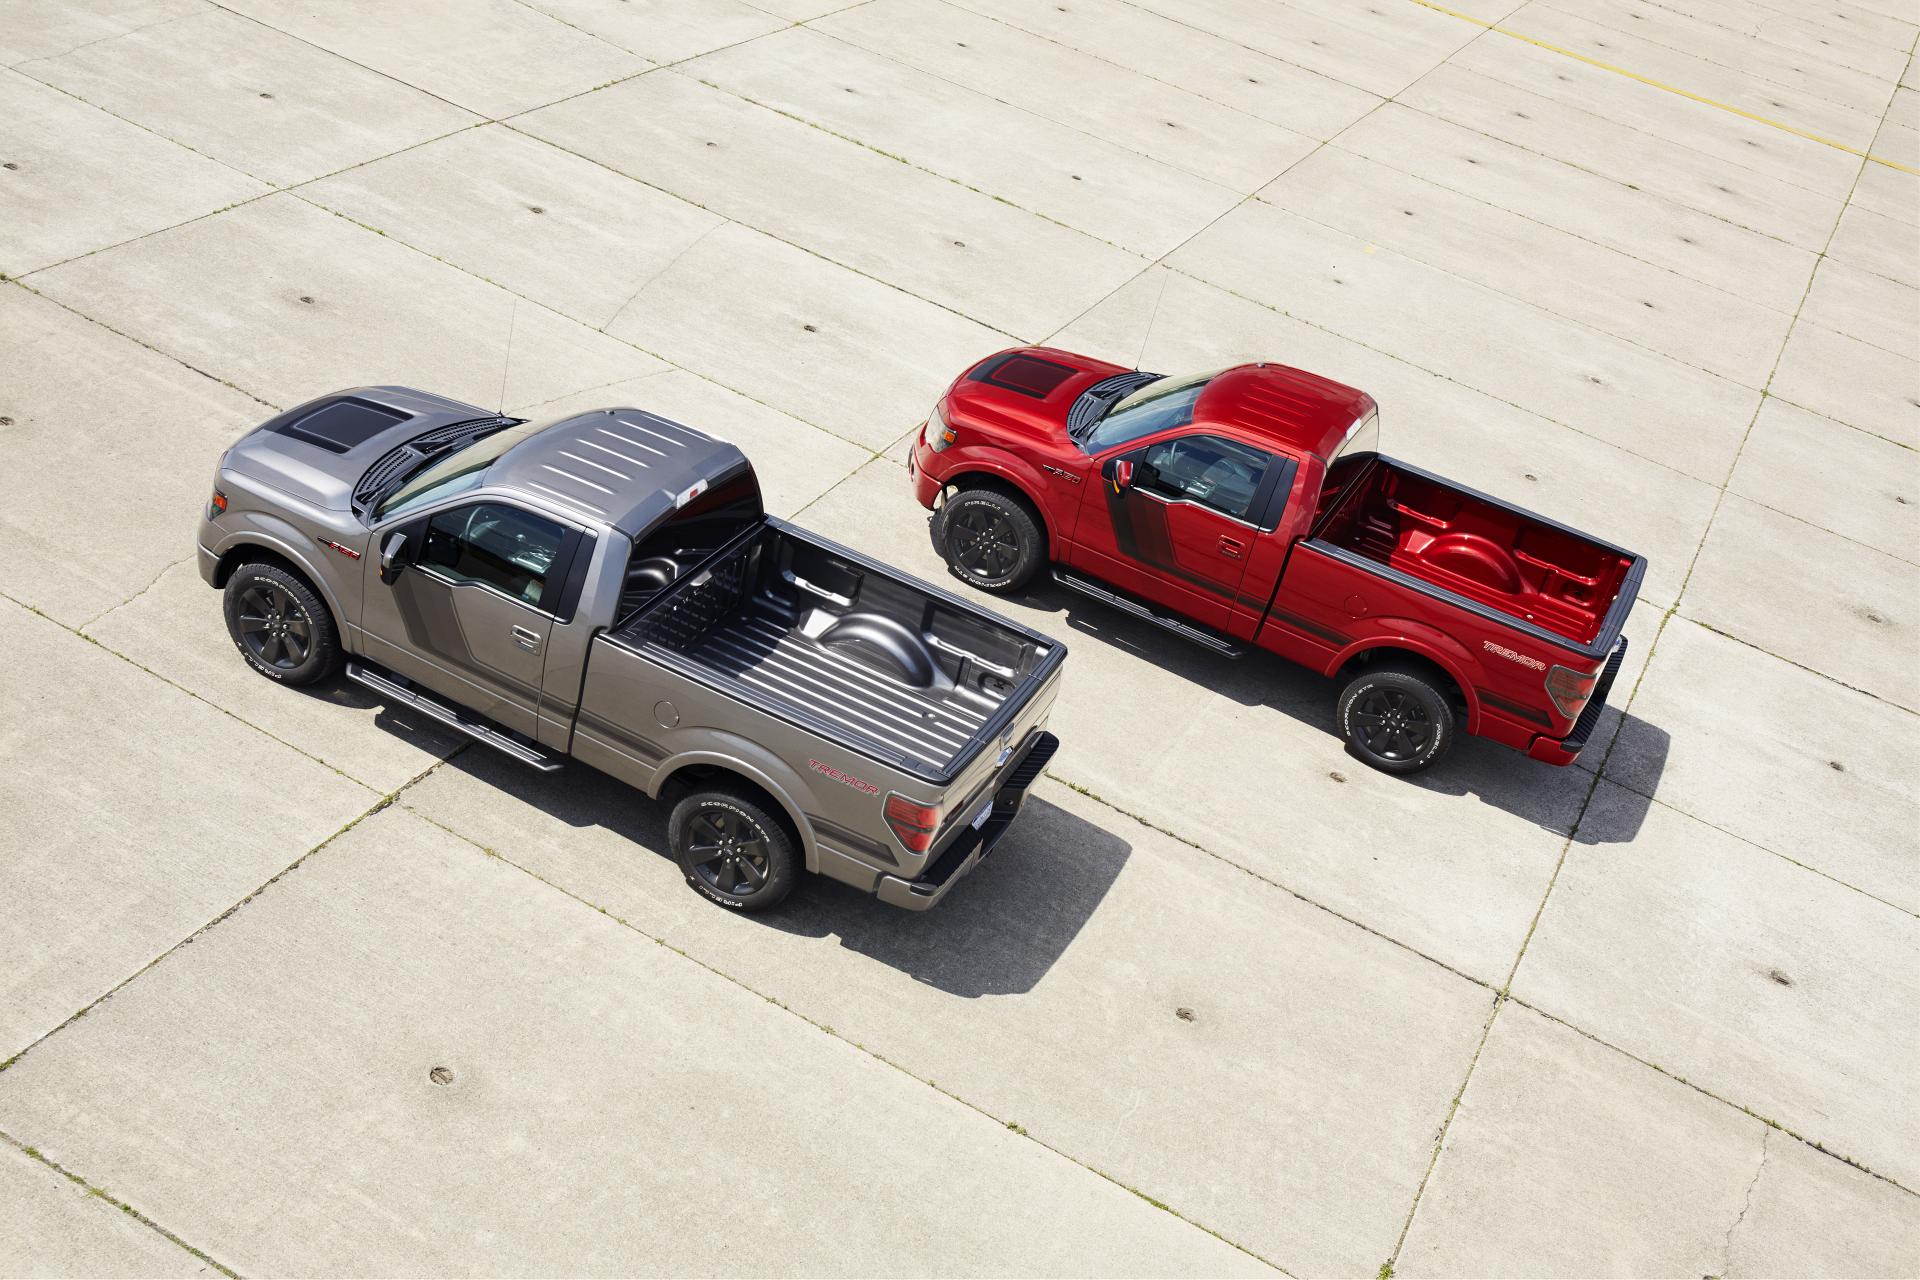 2014 Ford F 150 Tremor Image Photo 11 Of 40